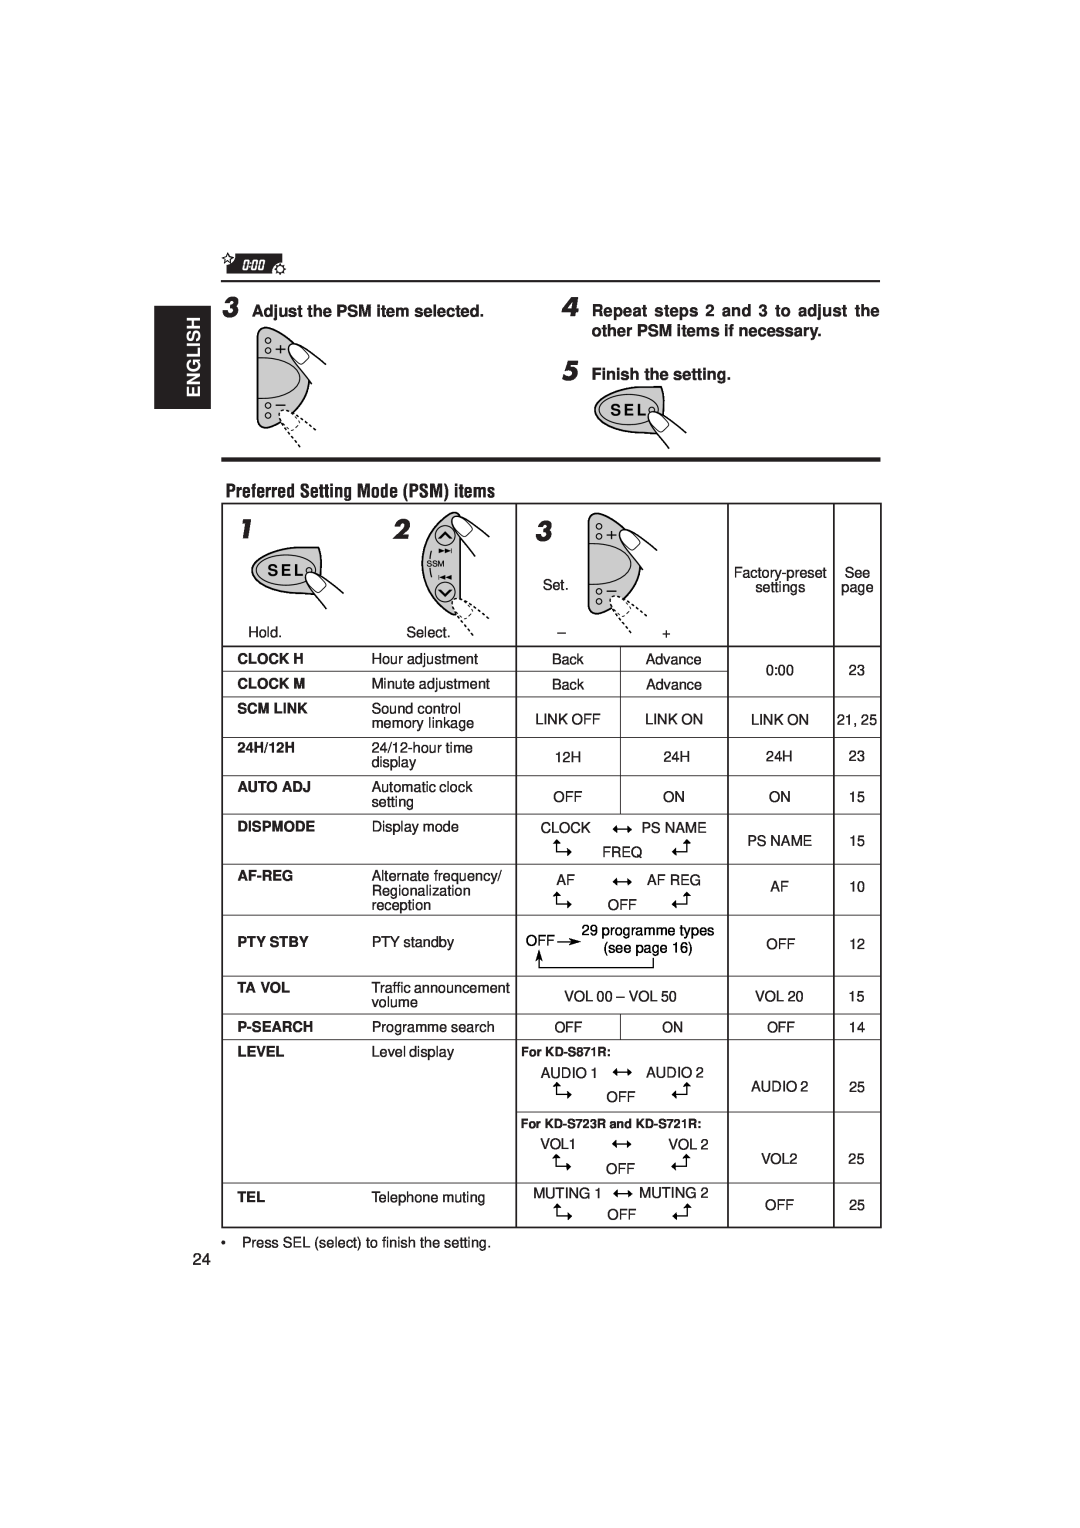 JVC KD-S871R Preferred Setting Mode PSM items, English, Adjust the PSM item selected, Repeat steps 2 and 3 to adjust the 